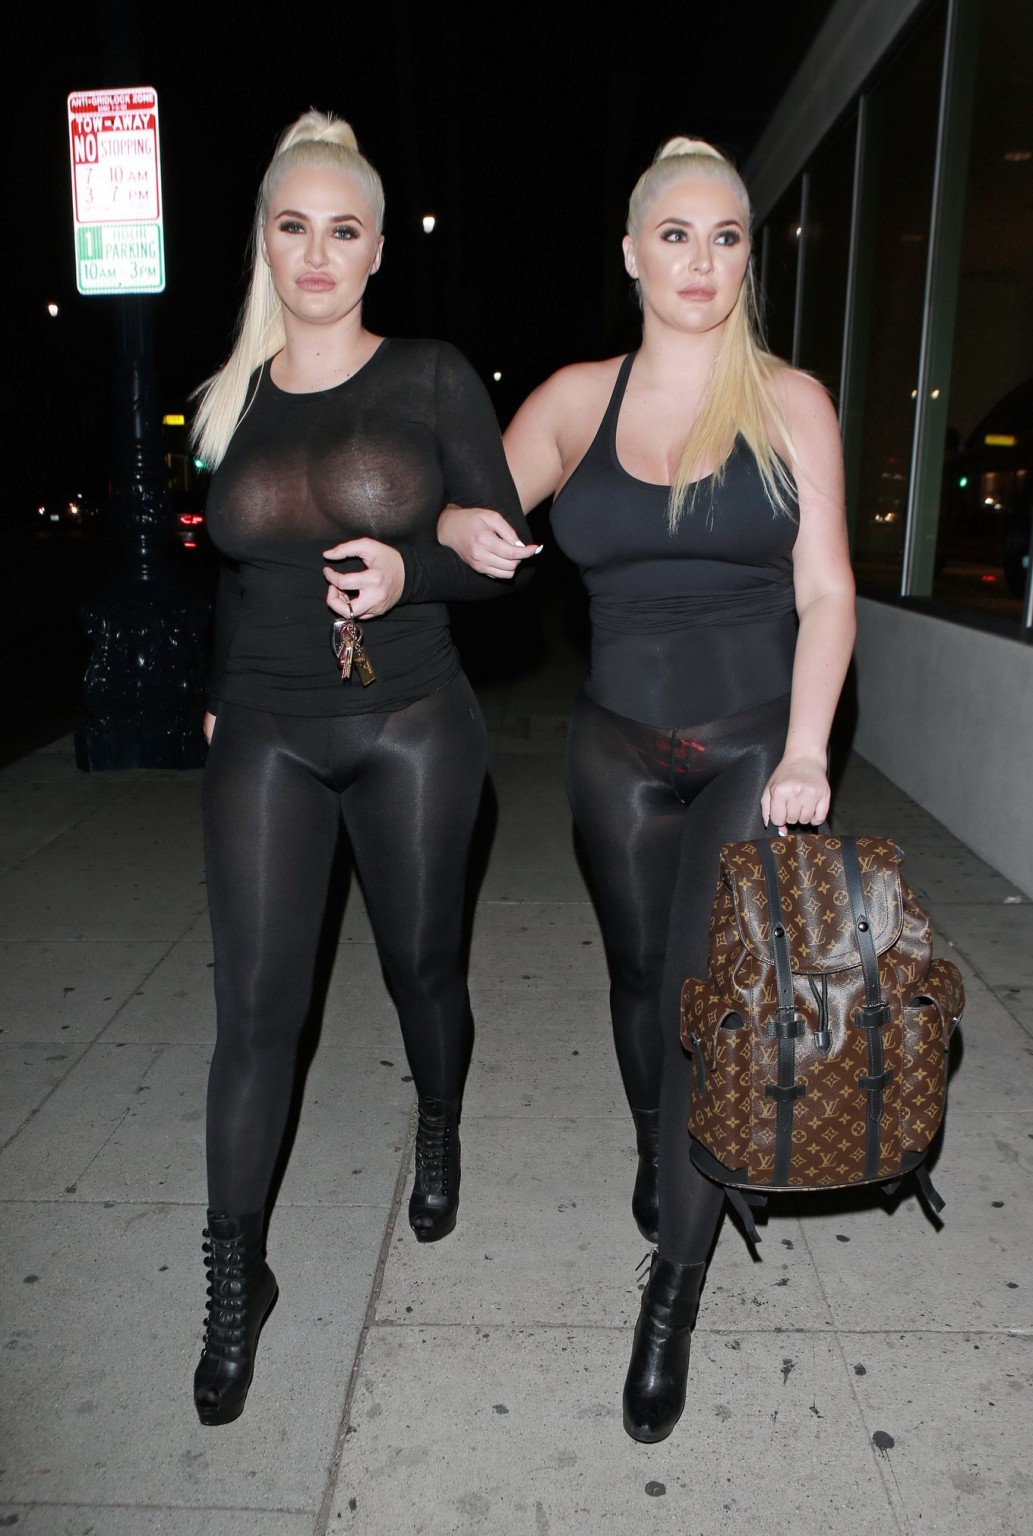 Shannon twins seethru to boobs and asses in public #75147062